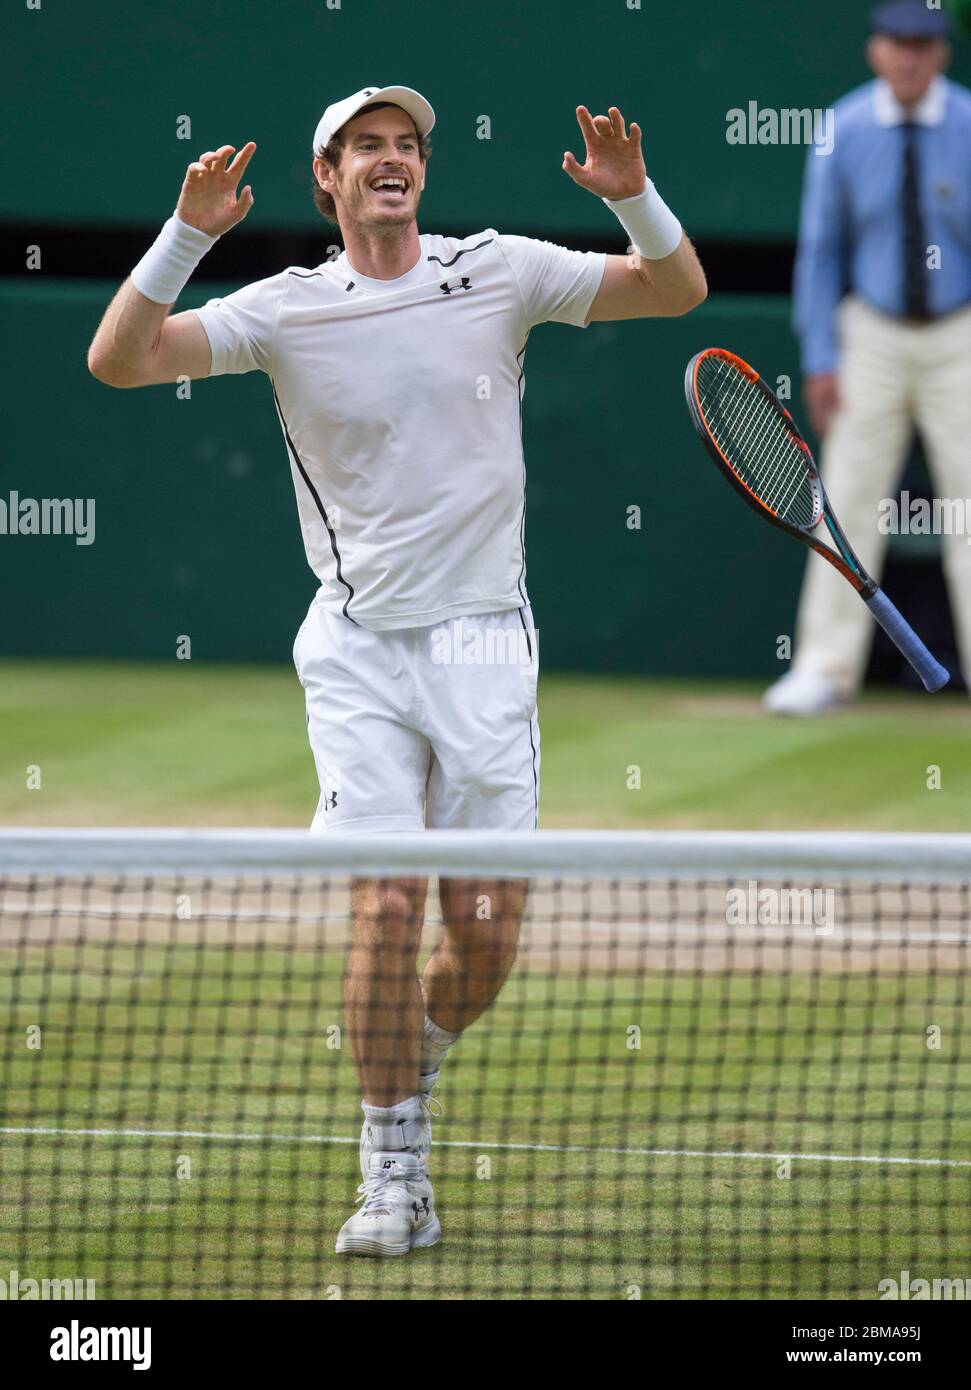 10th July 2016, Centre Court, Wimbledon: Mens Singles Final, Andy Murray celebrates after defeating Milos Raonic to win Wimbledon for the second time. Stock Photo